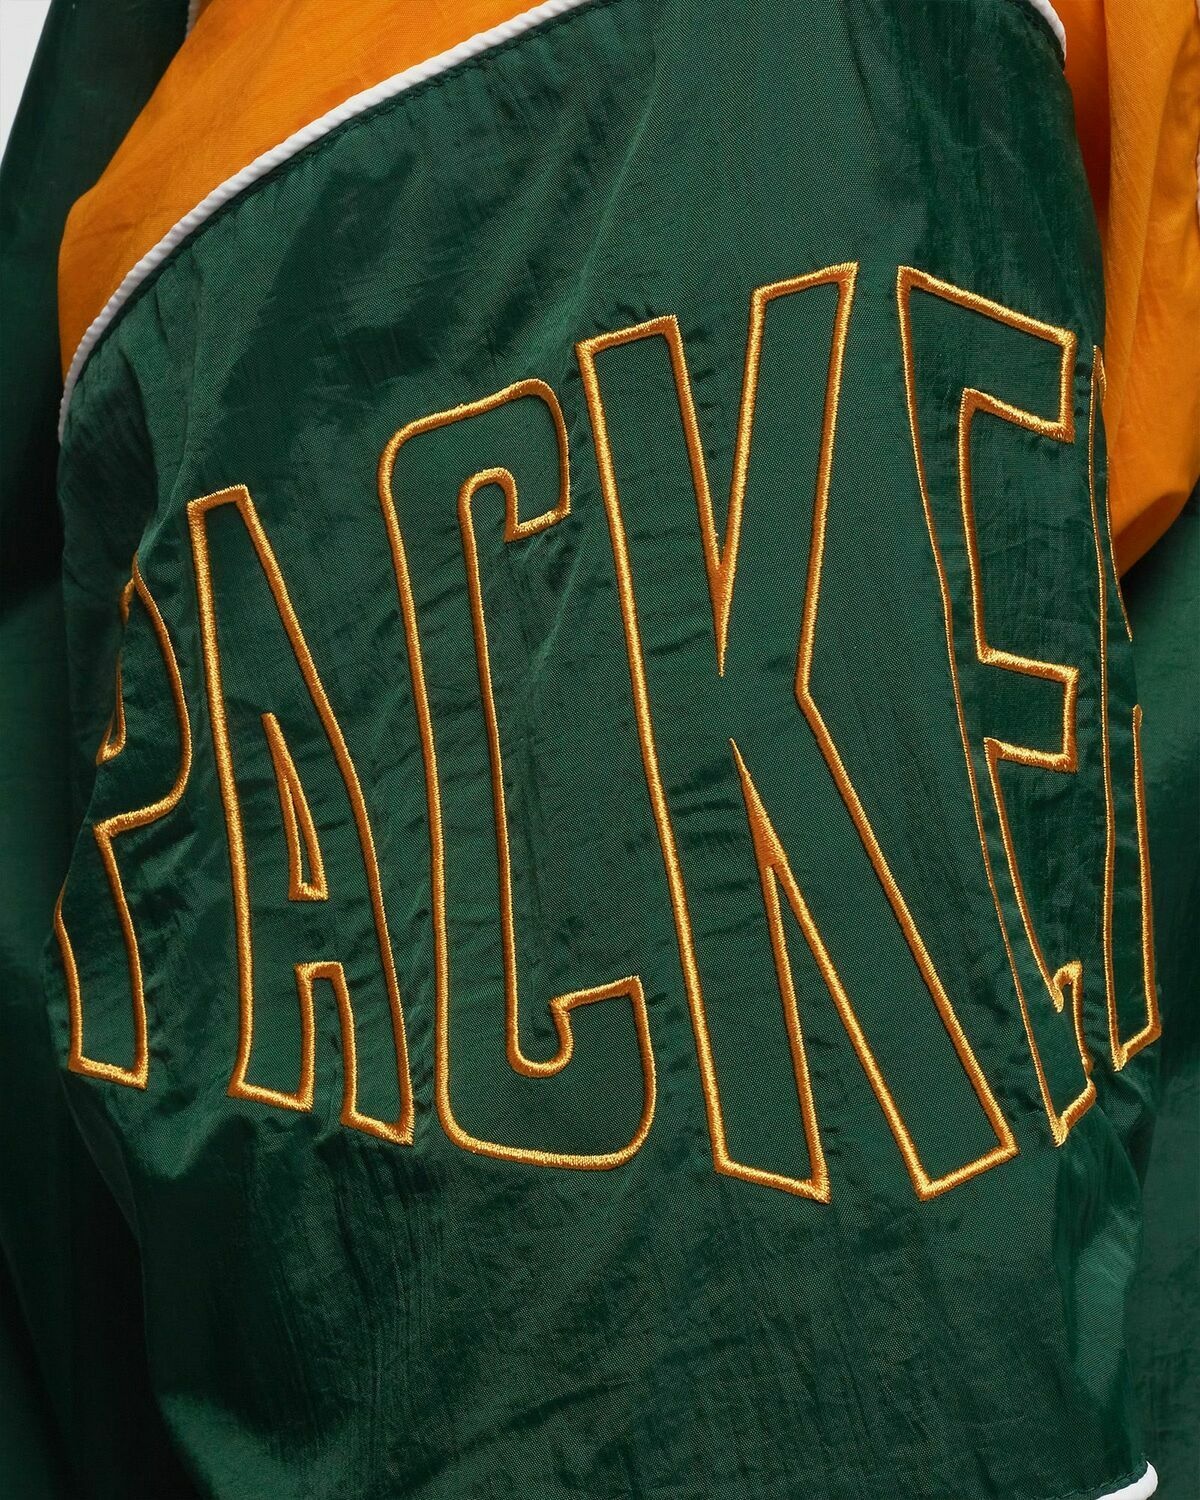 Mitchell & Ness Greenbay Packers   Sideline Jacket Green - Mens - Team Jackets/Track Jackets